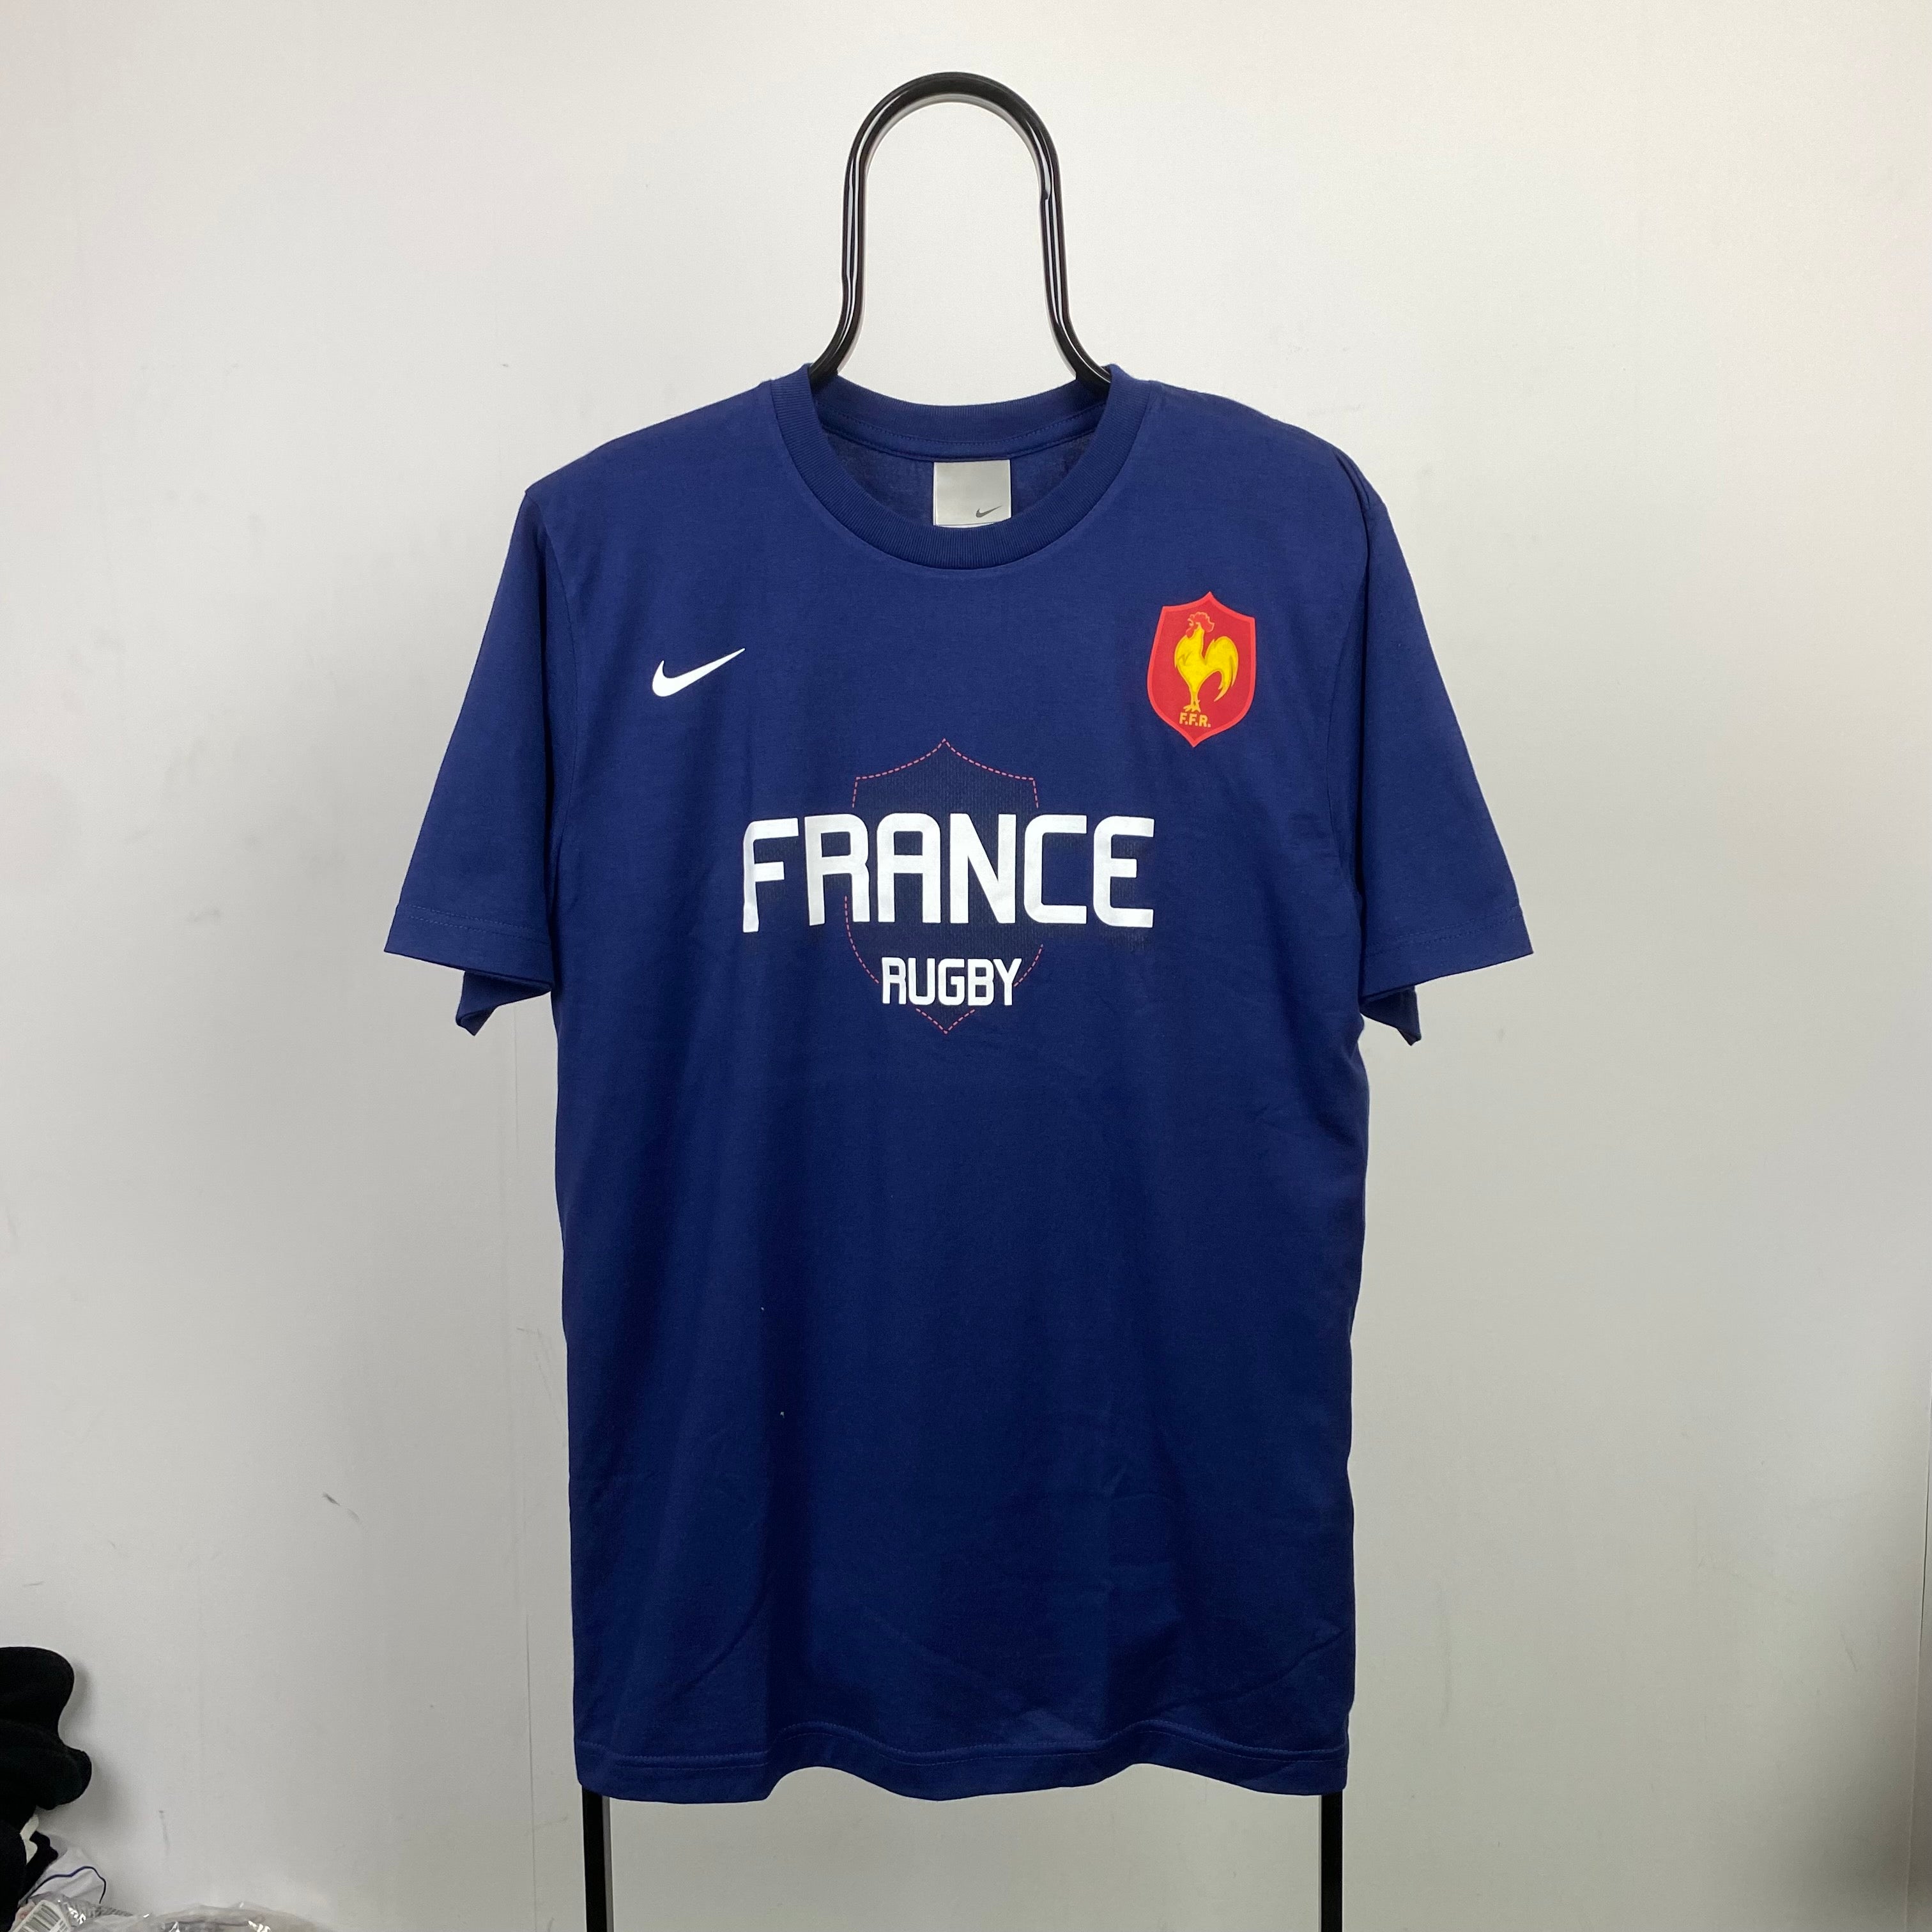 00s Nike France Rugby T-Shirt Blue Large